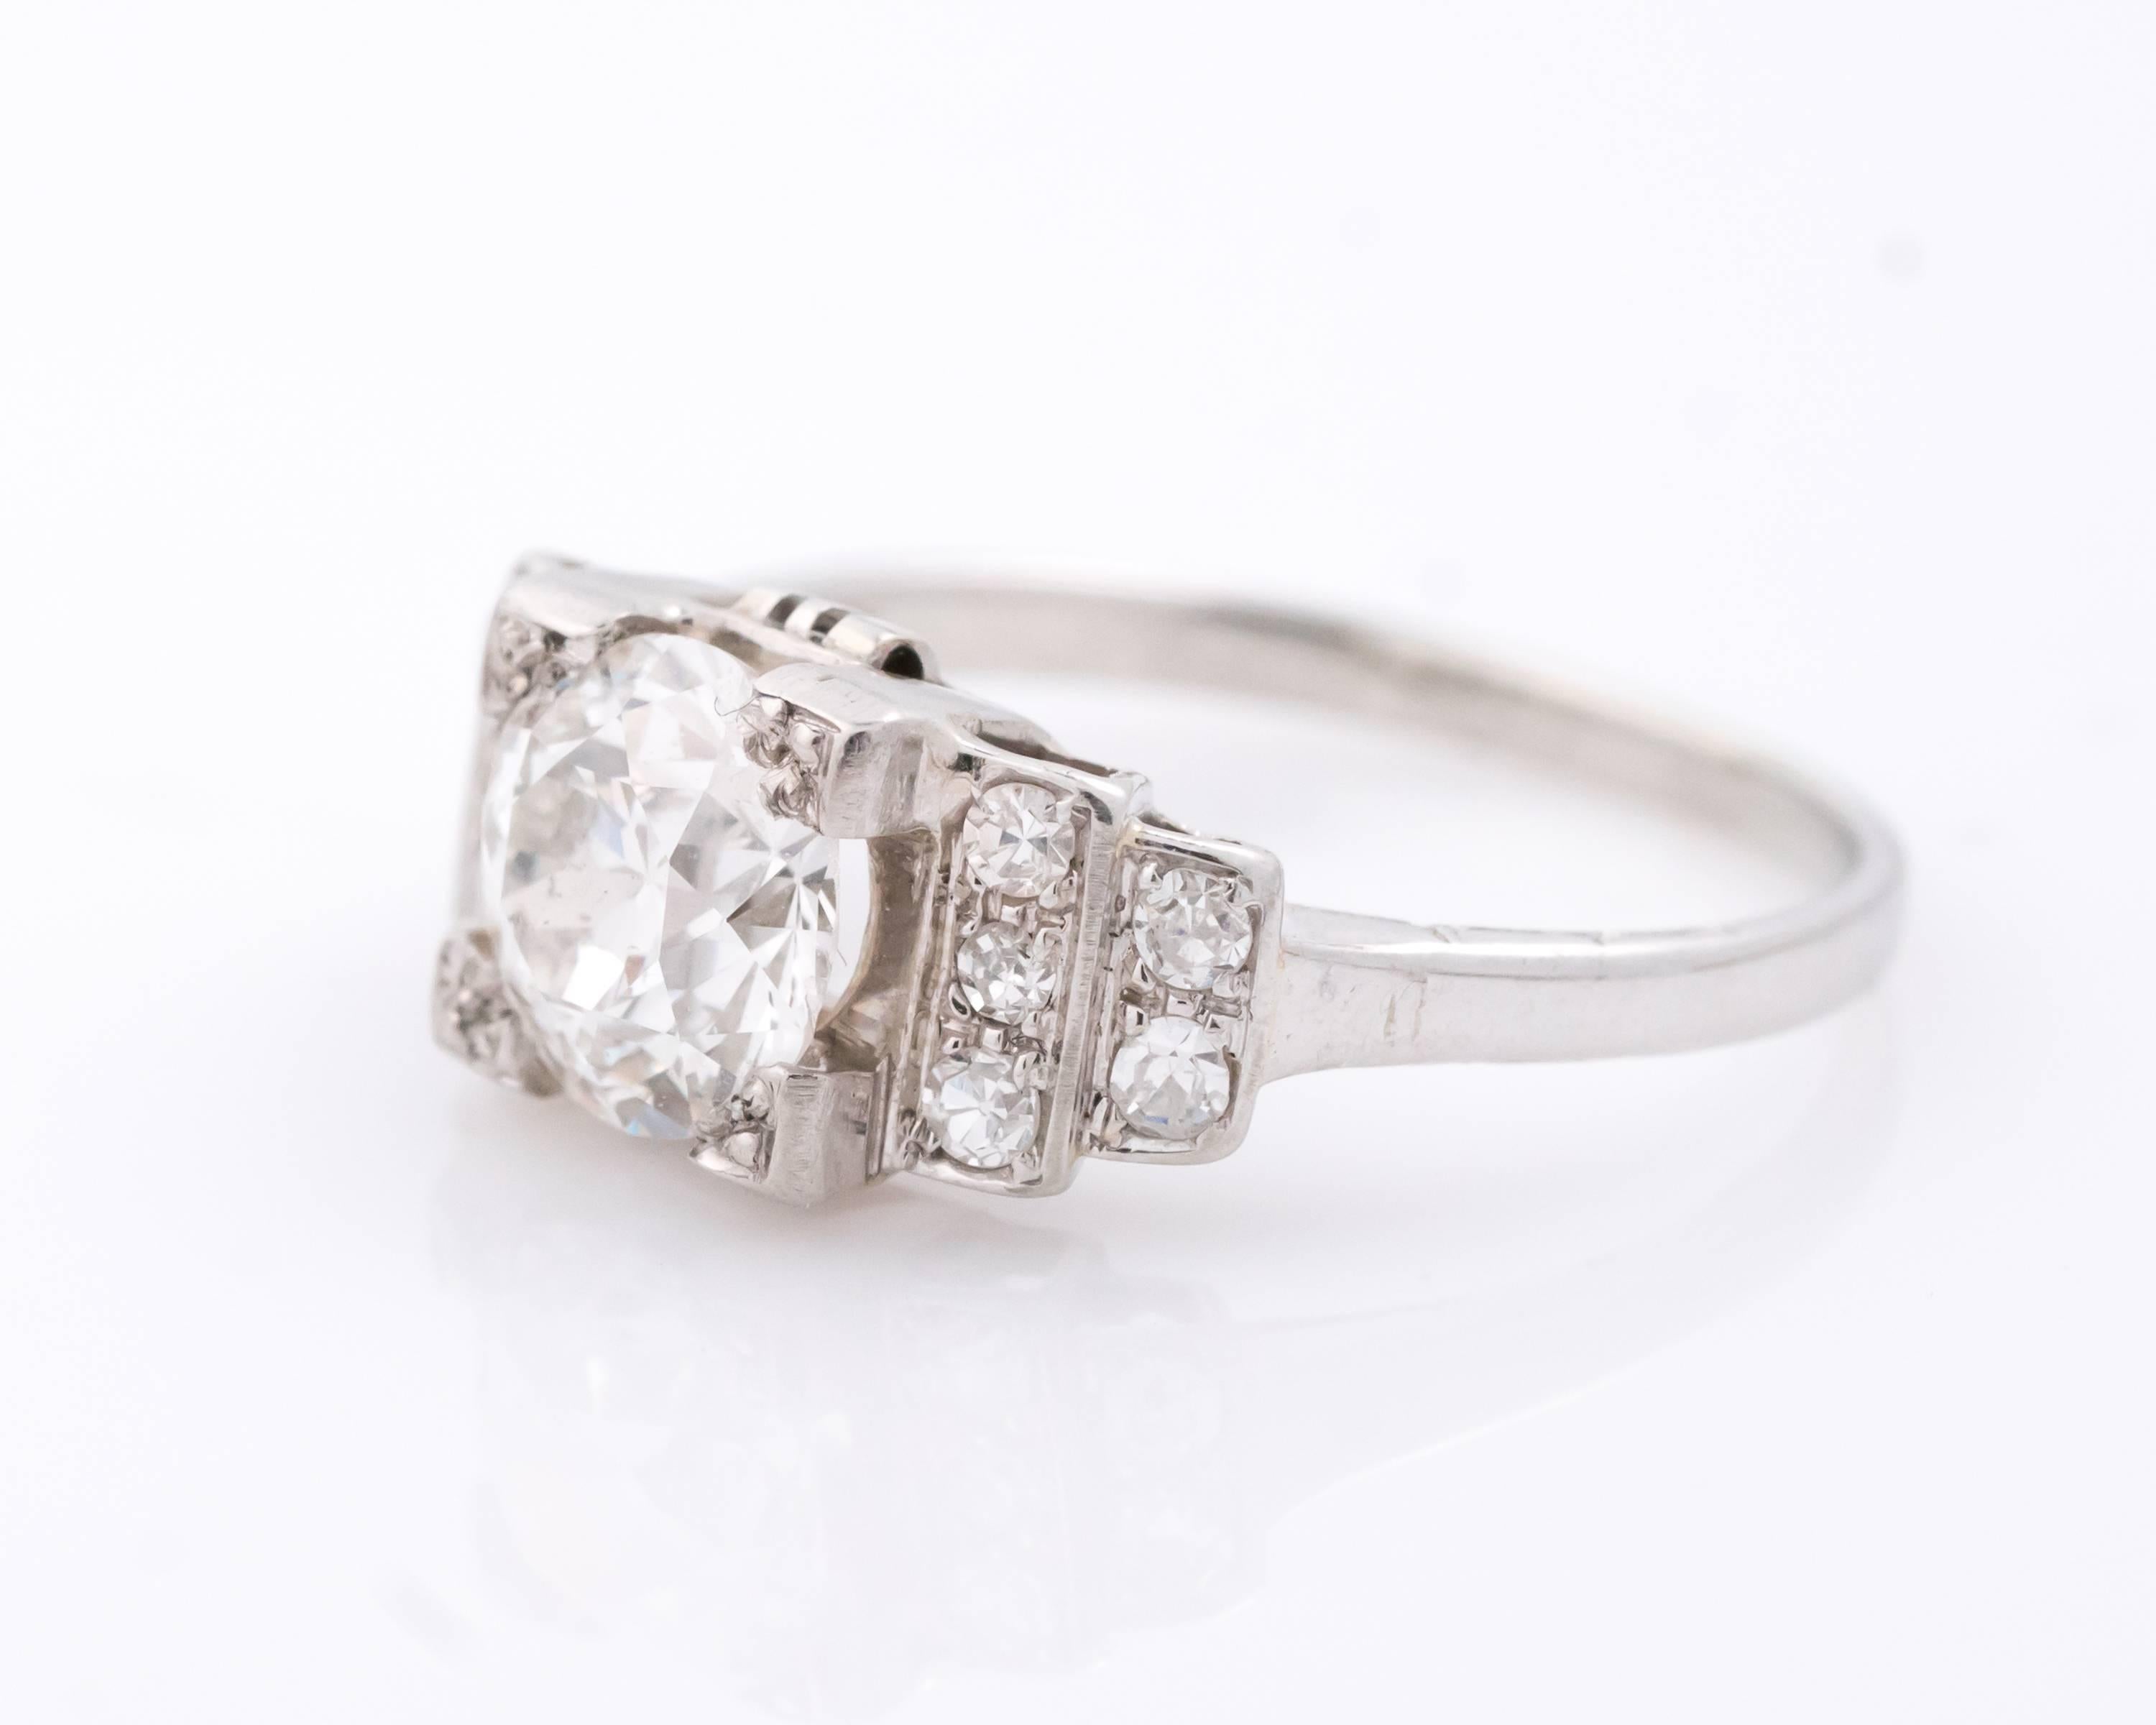 1930s 1.20 Carat Old European Diamond 18 Karat White Gold Engagement Ring. Features a 1.20 carat old european diamond with additional sparkling single-cut diamonds adorned in a cathedral 18 karat white gold setting. The center stone (1.20 carats) is